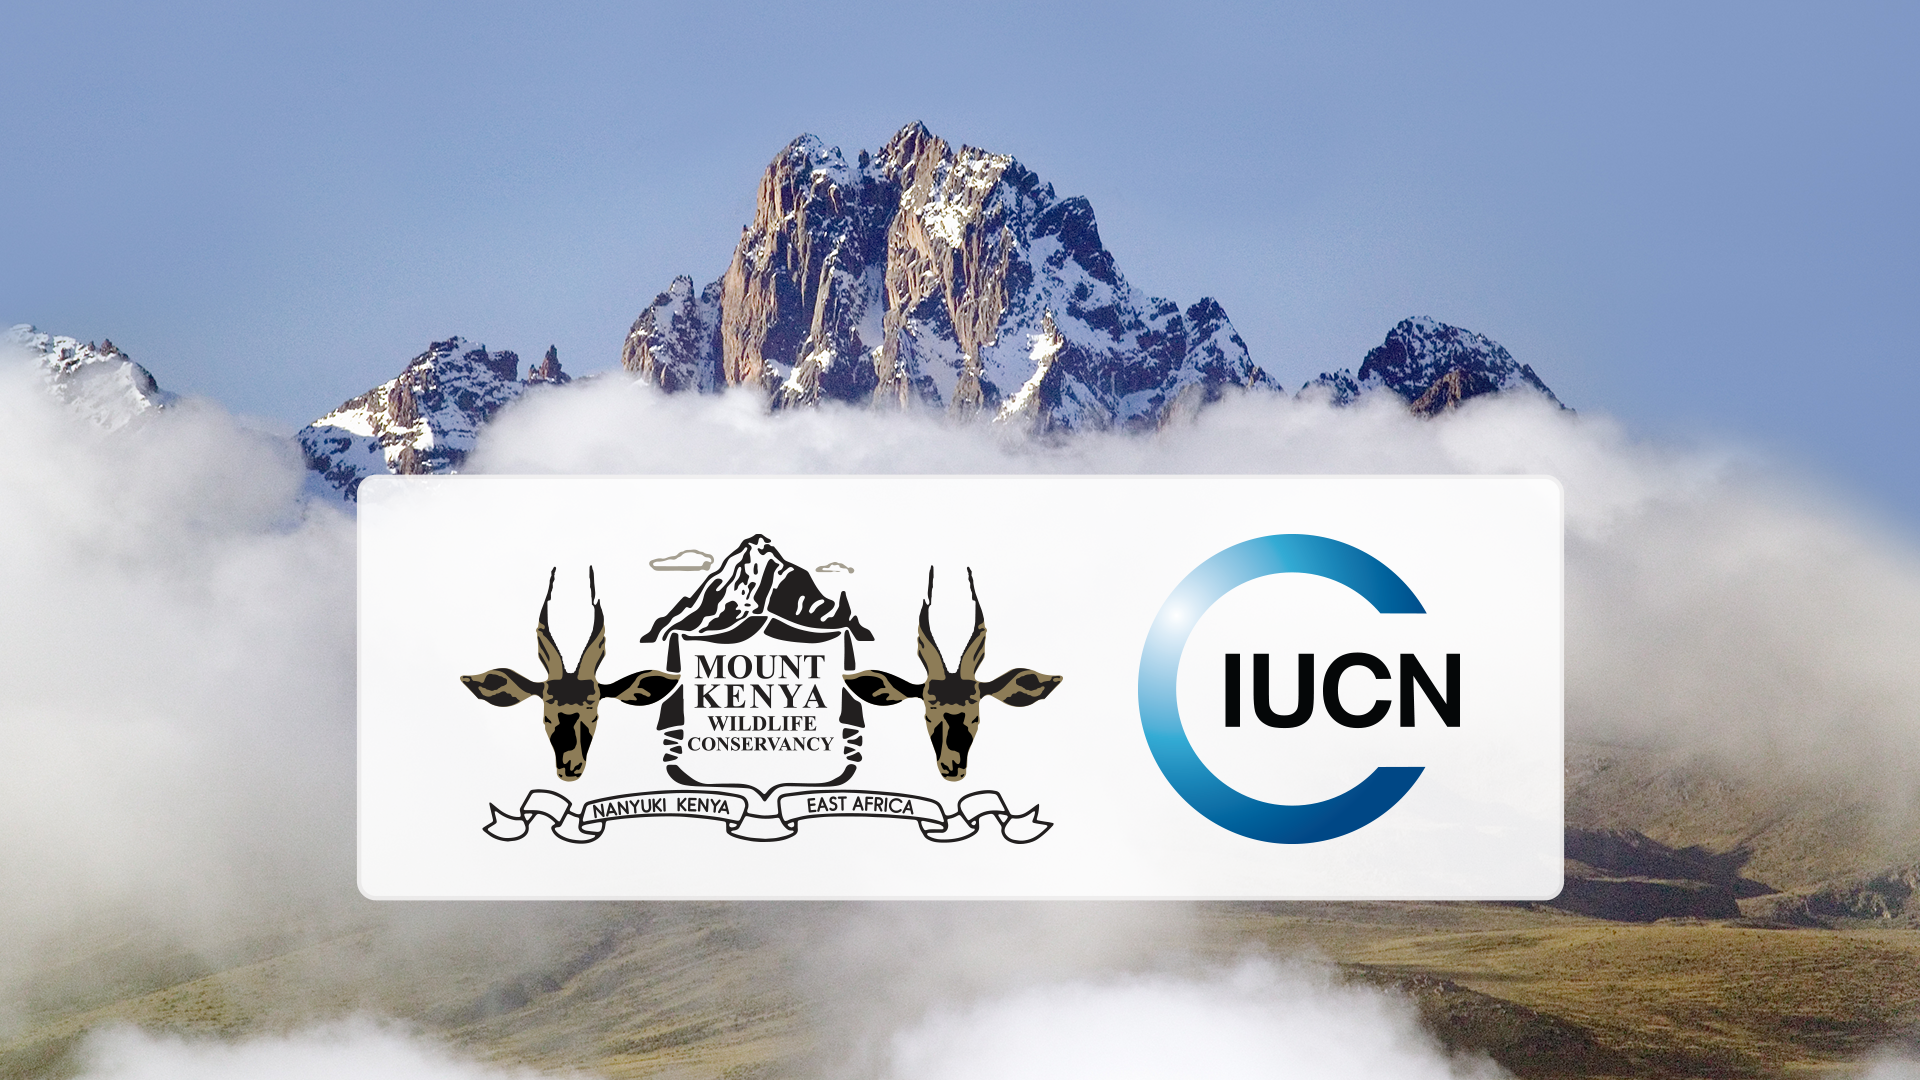 Mount Kenya Wildlife Conservancy (MKWC) Joins Global conservation body, the International Union for Conservation of Nature (IUCN)